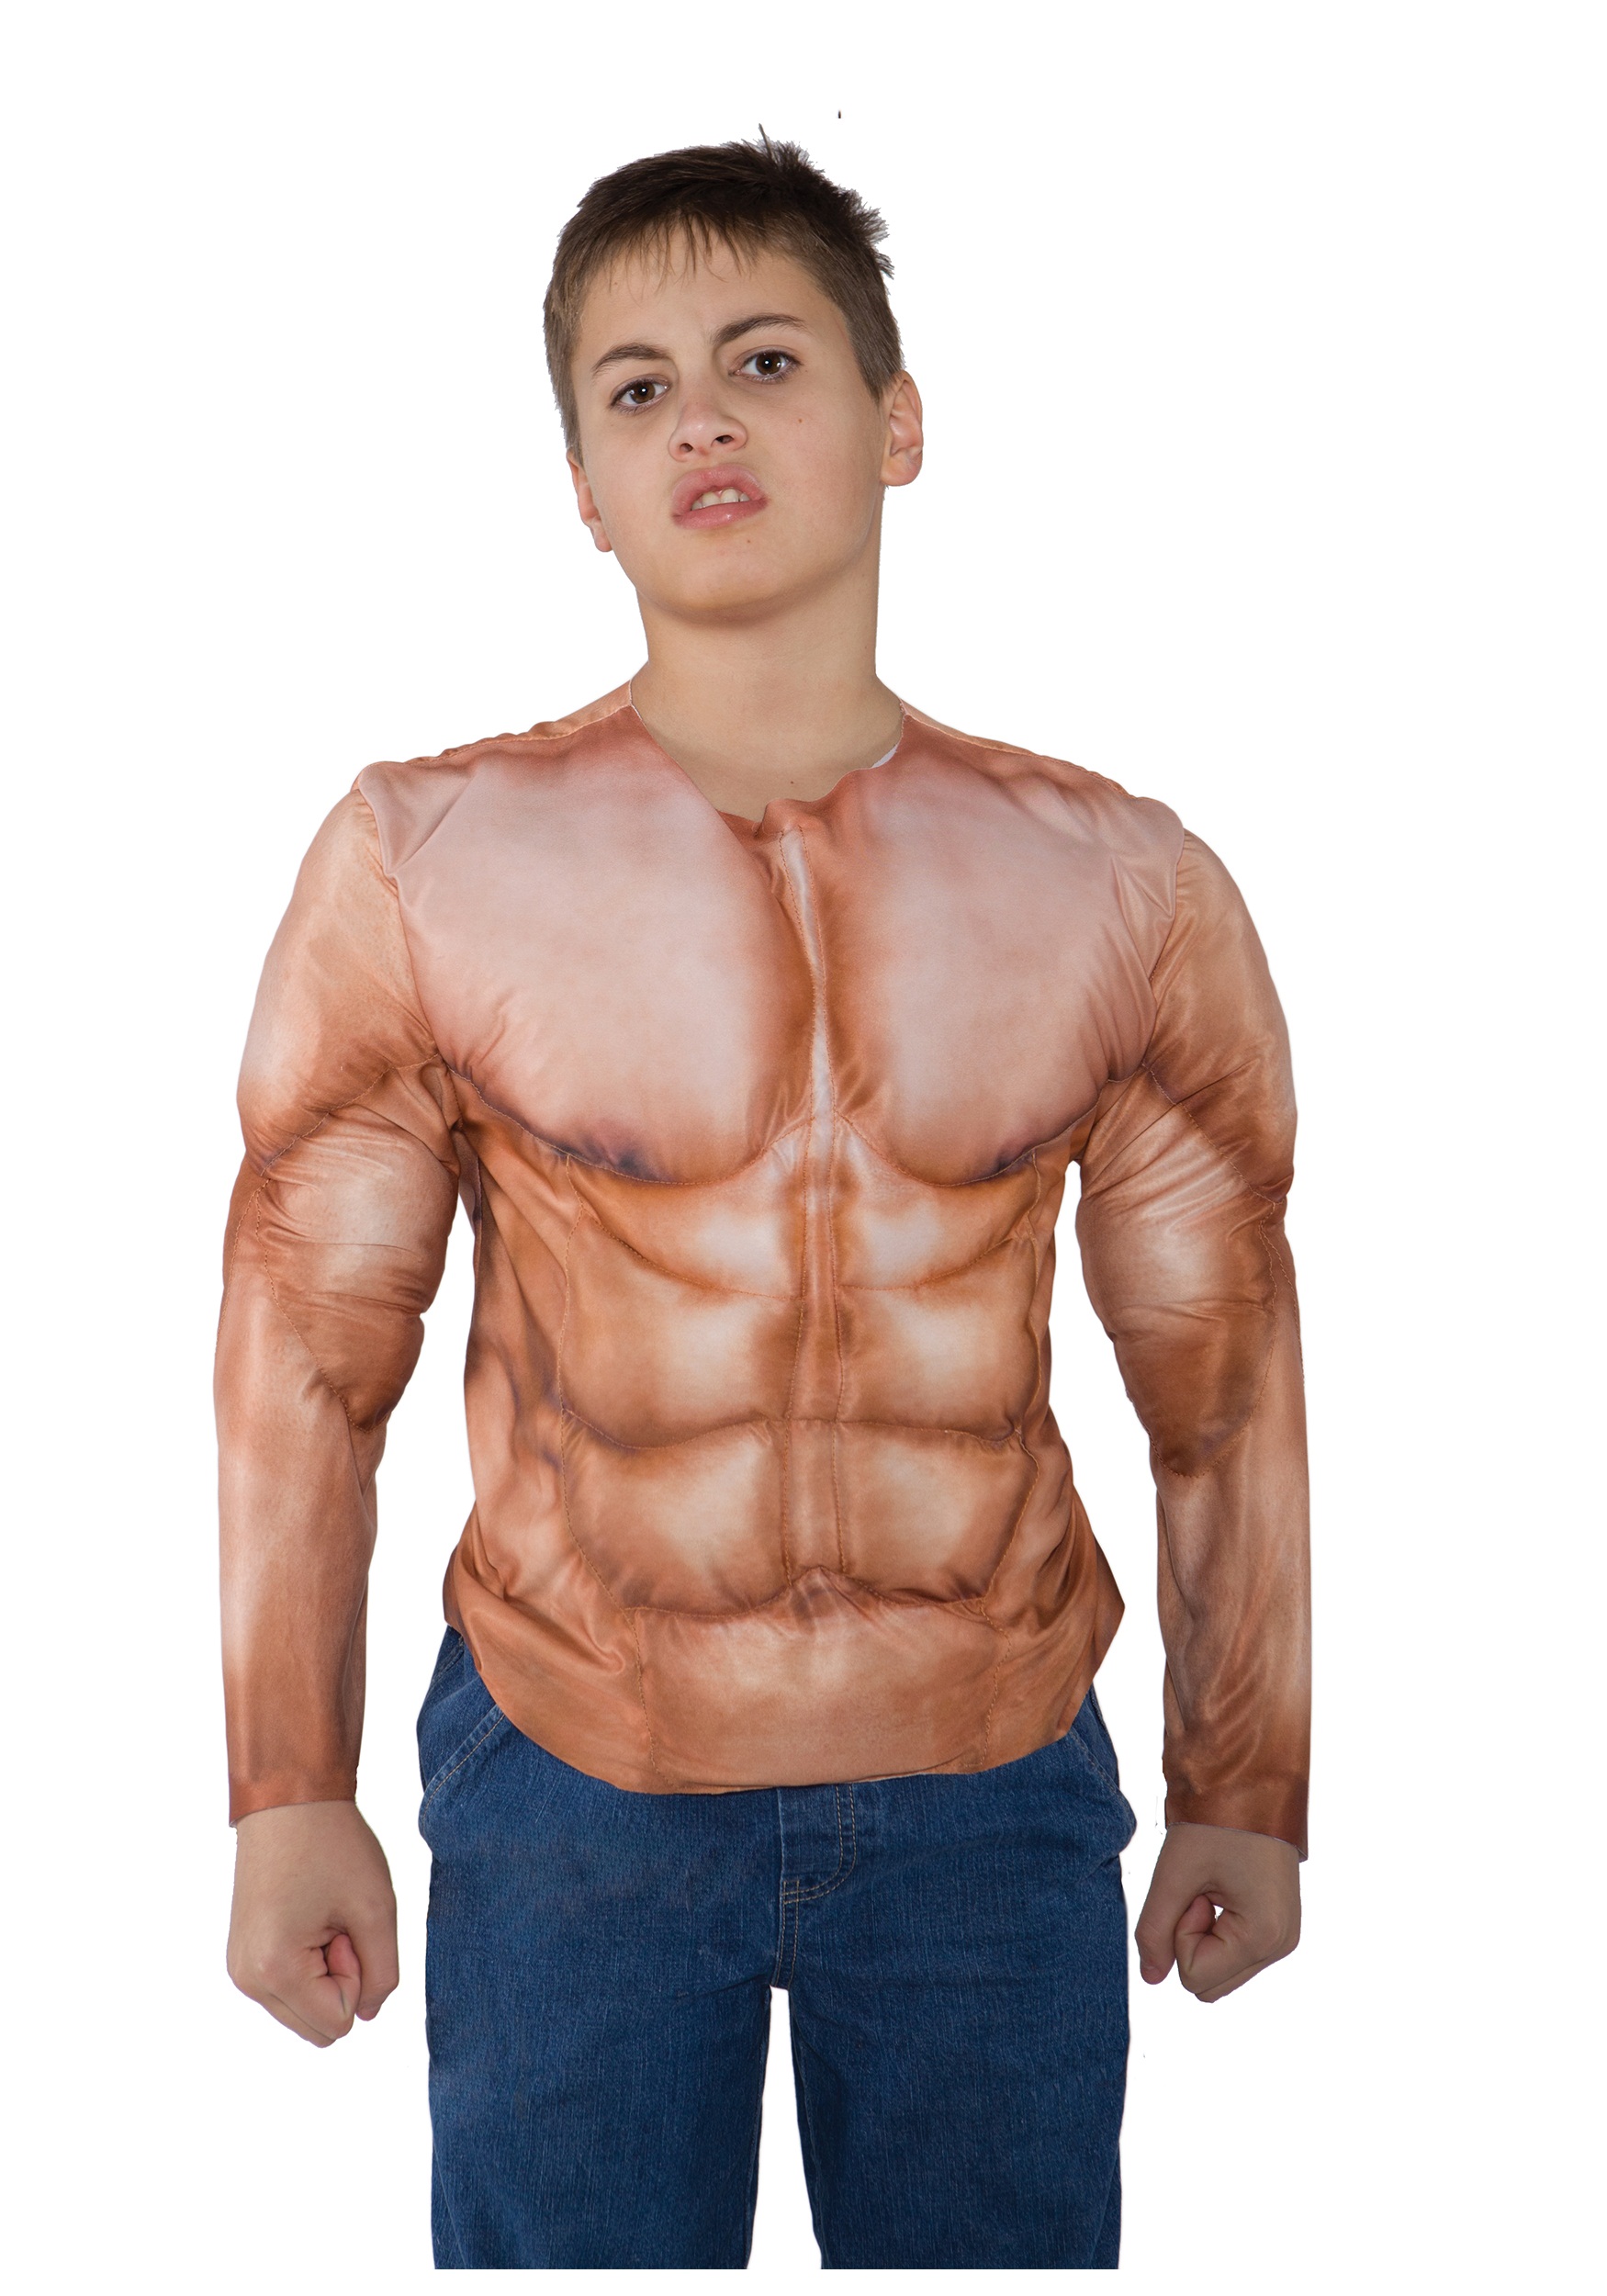 https://images.halloweencostumes.com/products/24273/1-1/muscles--kids.jpg